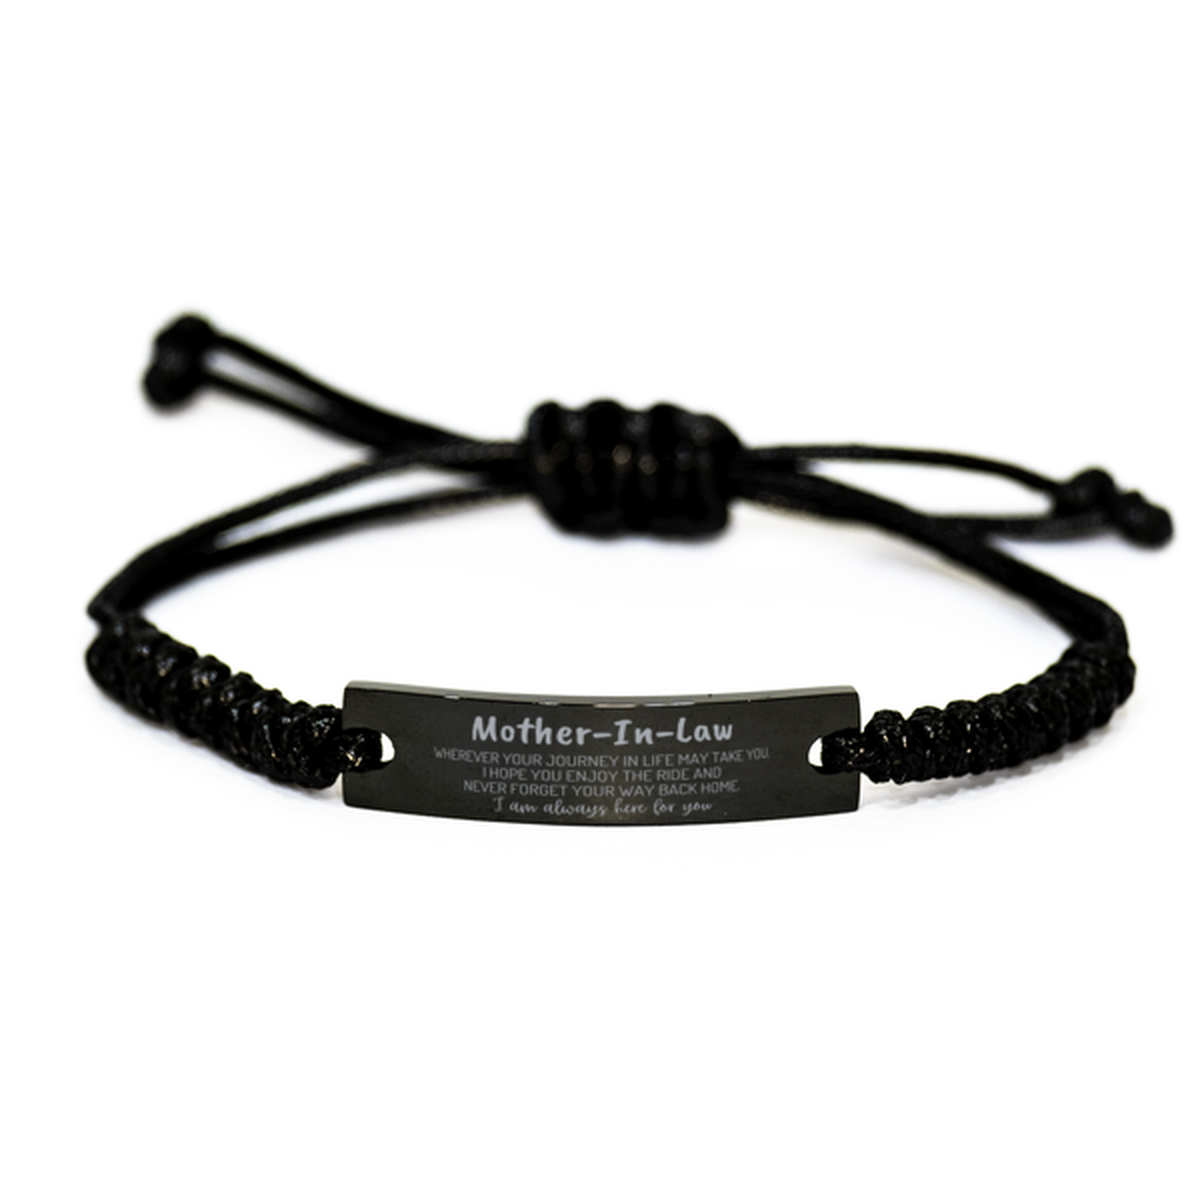 Mother-In-Law wherever your journey in life may take you, I am always here for you Mother-In-Law Black Rope Bracelet, Awesome Christmas Gifts For Mother-In-Law, Mother-In-Law Birthday Gifts for Men Women Family Loved One